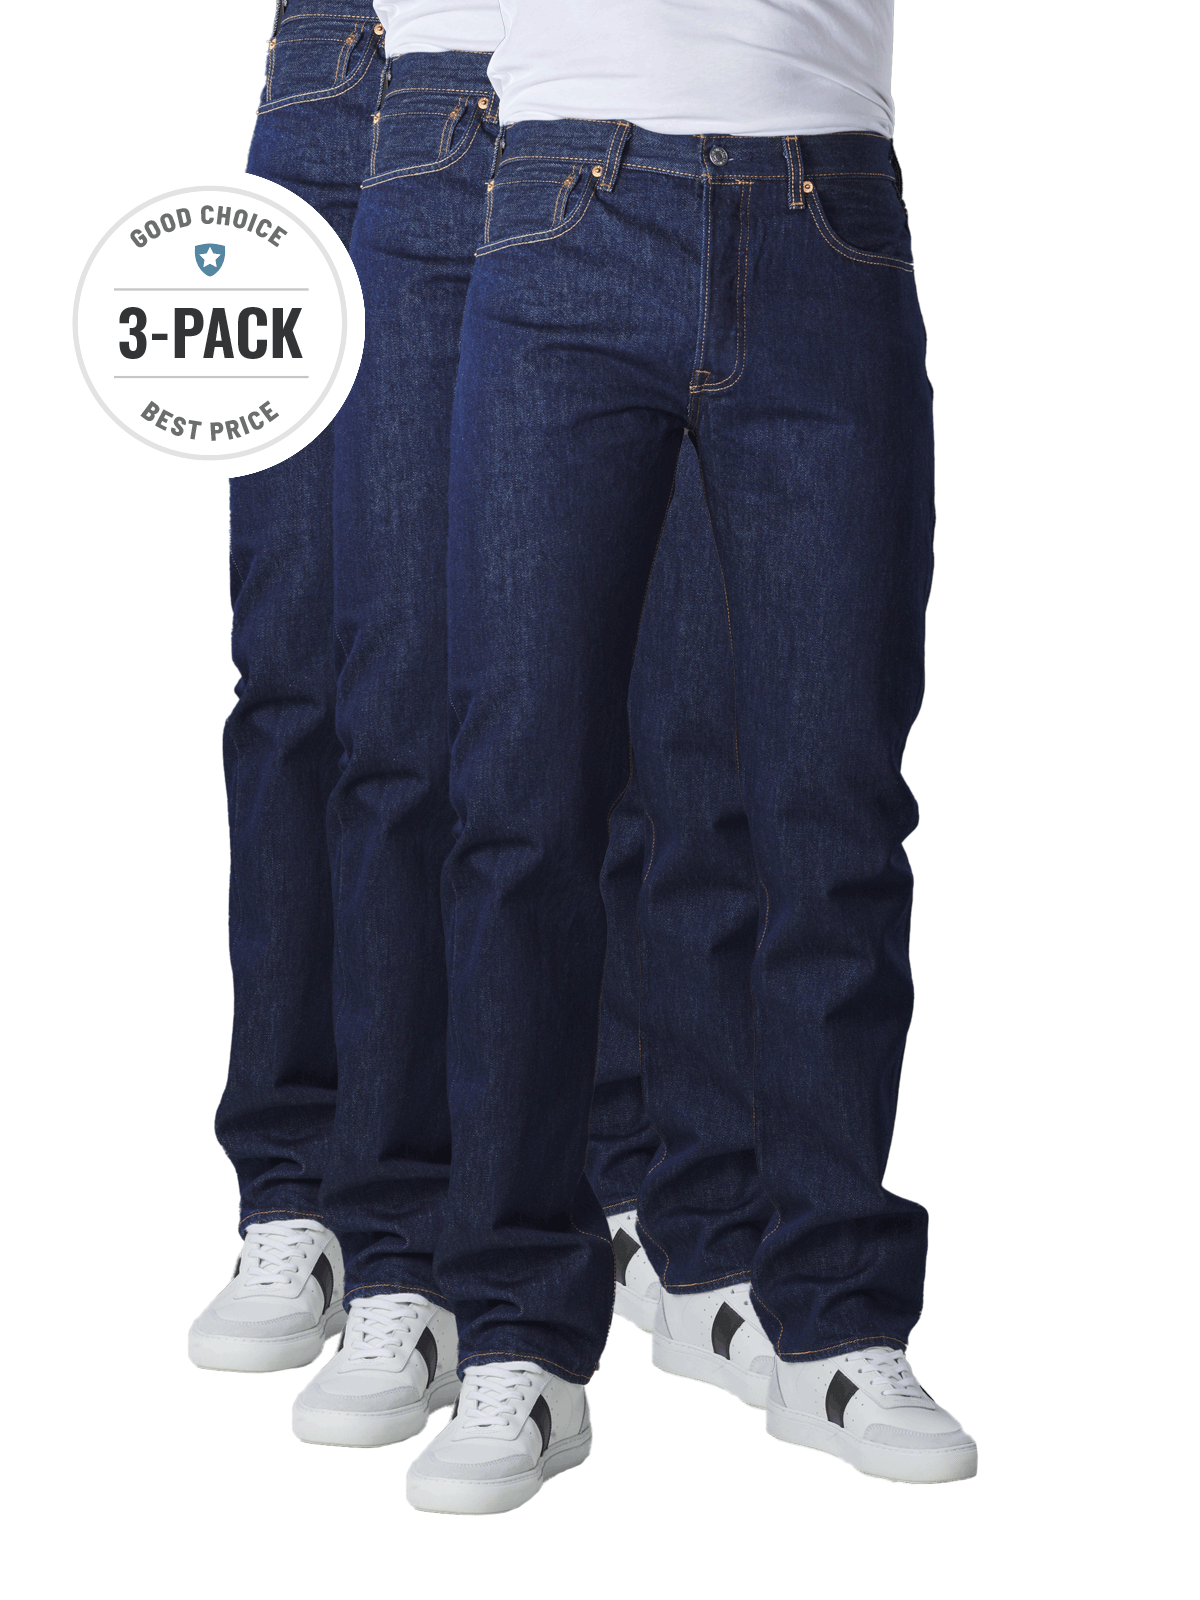 Levi's 501 Jeans Straight Fit rinse 3-Pack Levi's Men's Jeans | Free  Shipping on  - SIMPLY LOOK GOOD